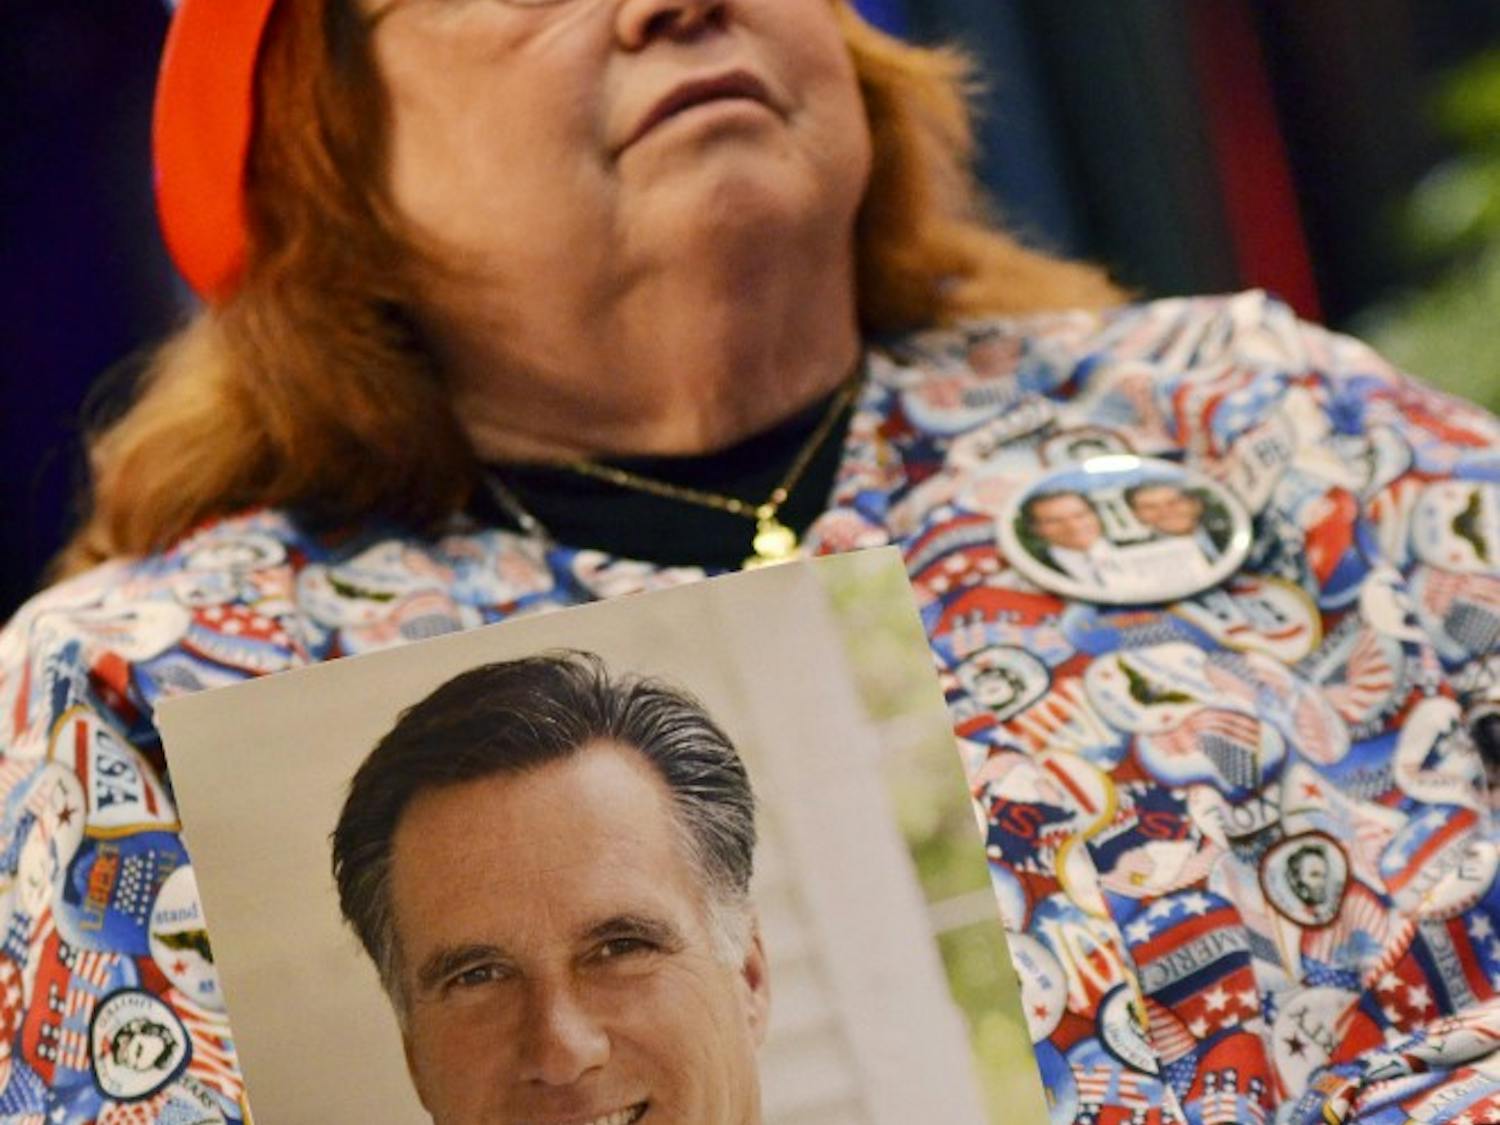 Lee Churchill seen holding a Romney photograph in her home made shirt.